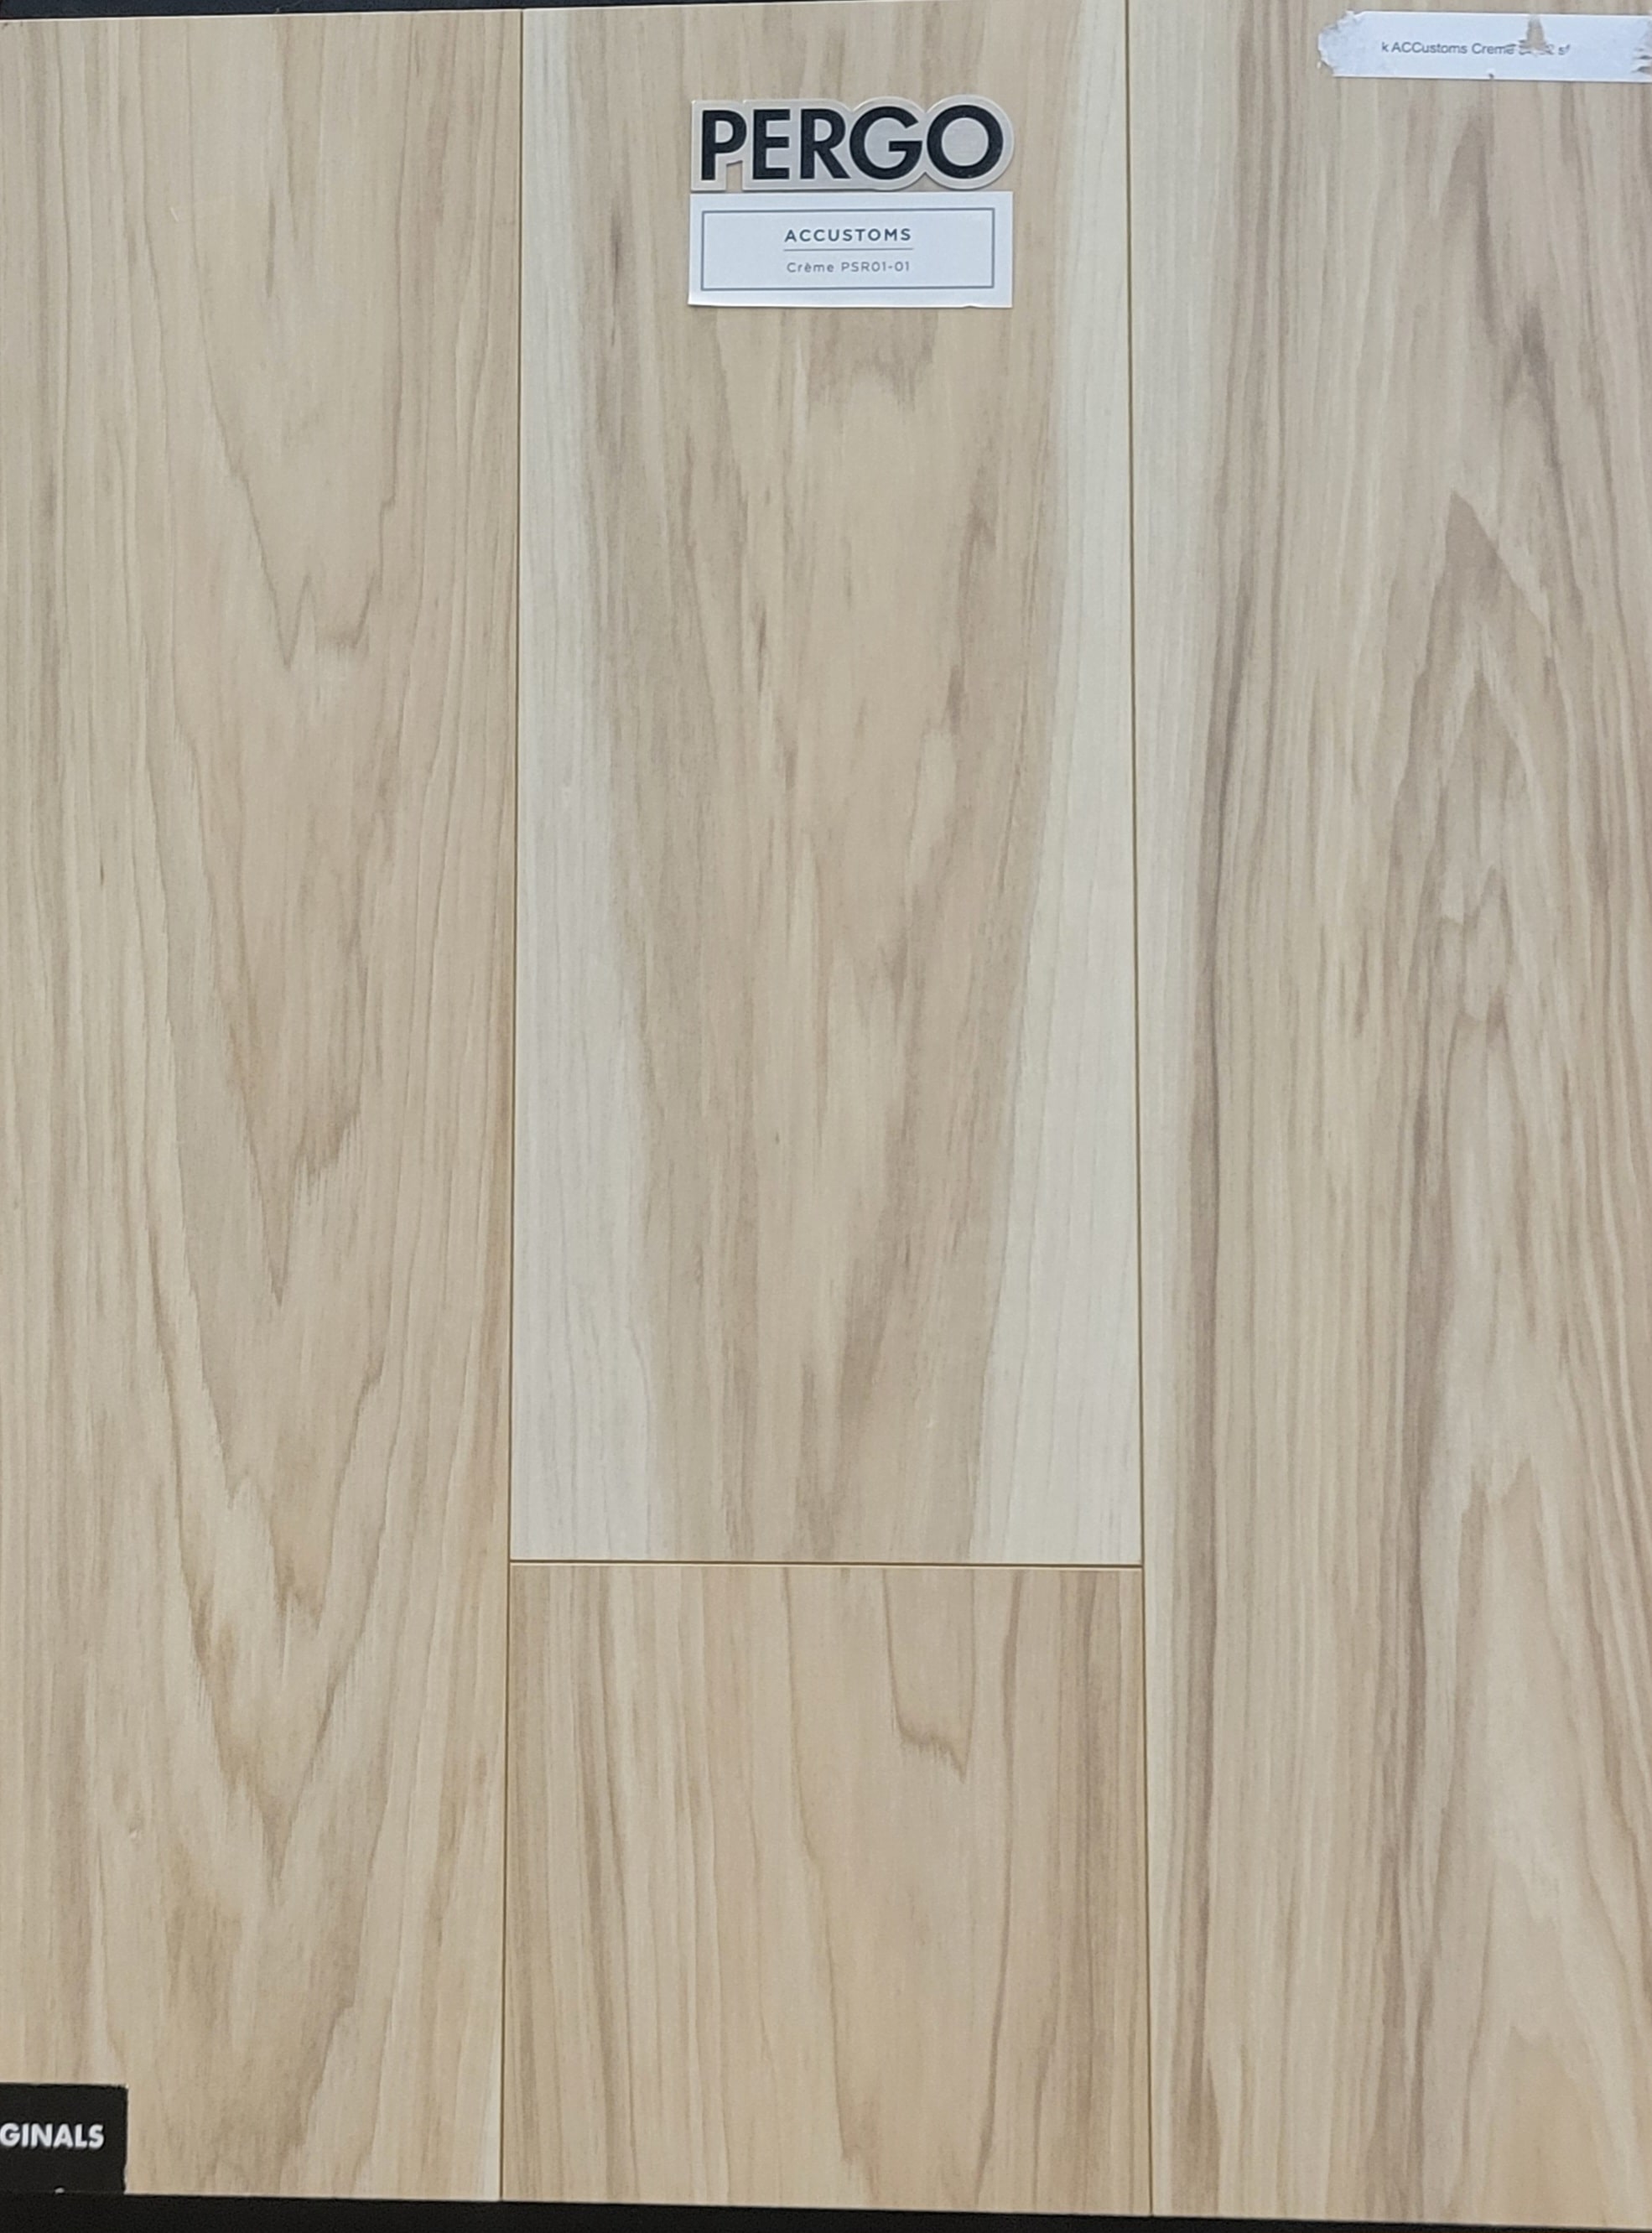 Laminate | About Floors N' More